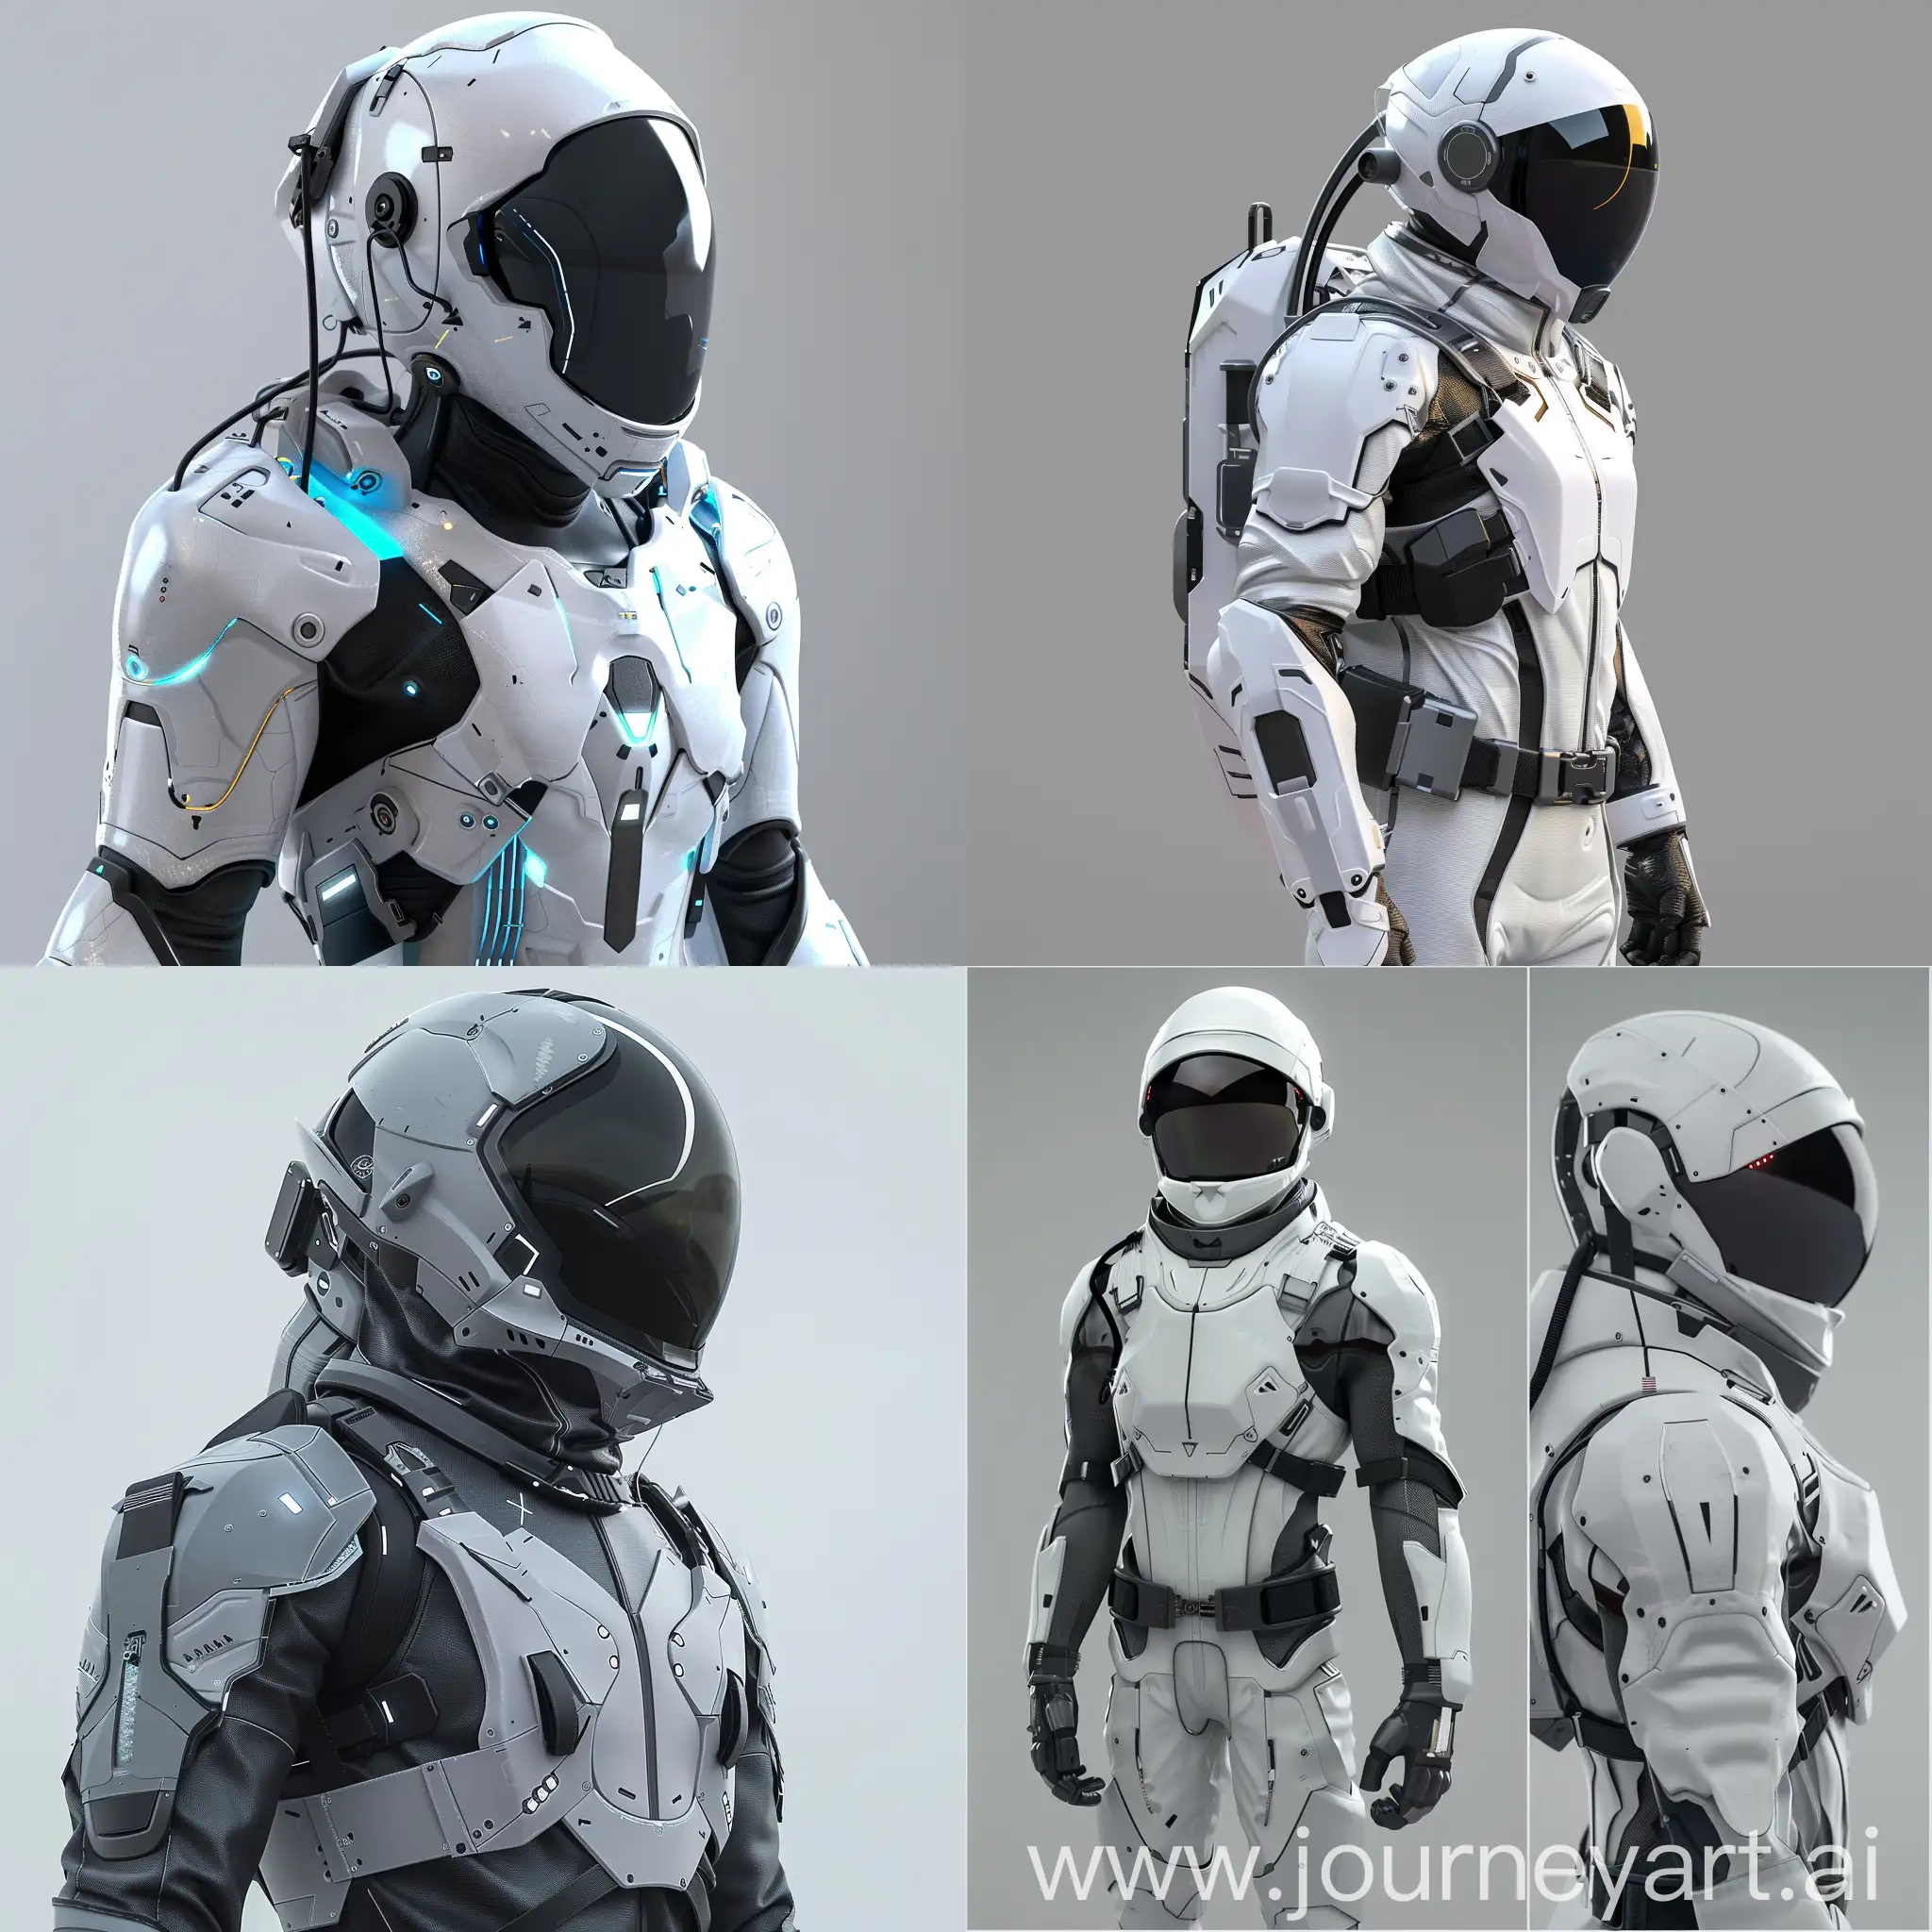 Futuristic space suit, Self-Healing Nanobody, Augmented Reality Visor, Integrated Jetpack, Advanced Life Support System, Biometric Monitoring Suit, Electromagnetic Shielding, Morphing Design, Hypersonic Travel Suit, AI Companion Integration, Neural Interface, Aerodynamic Silhouette, Kinetic Overlays, Metallic Sheen, Modular Panels, Integrated Utility Lines, Organic Textures, Asymmetrical Design, Light Sculptures, Personalized Touches, Visor Design, in unreal engine 5 style --stylize 1000